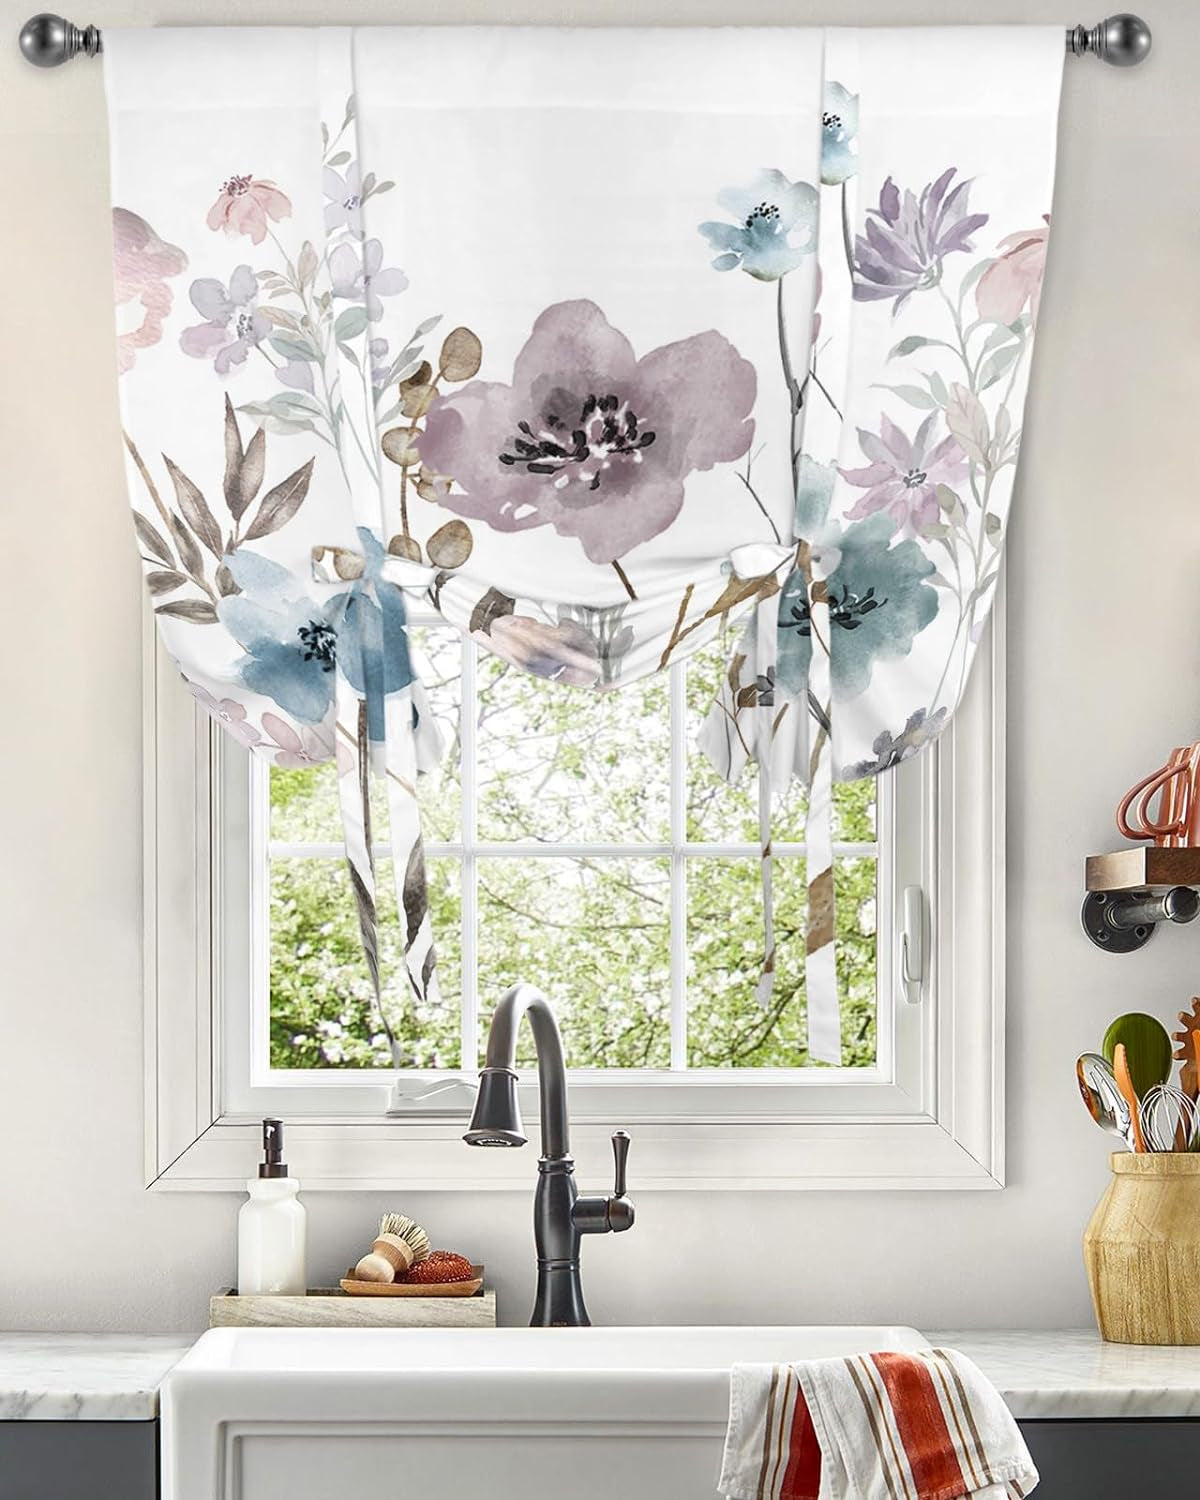 Tie up Watercolor Floral Valance Curtains for Windows, Adjustable Window Shade Valances for Kitchen Living Room Bathroom Rod Pocket Curtains Window Treatments Grey Blue Purple Herb Botanical 34"X45"